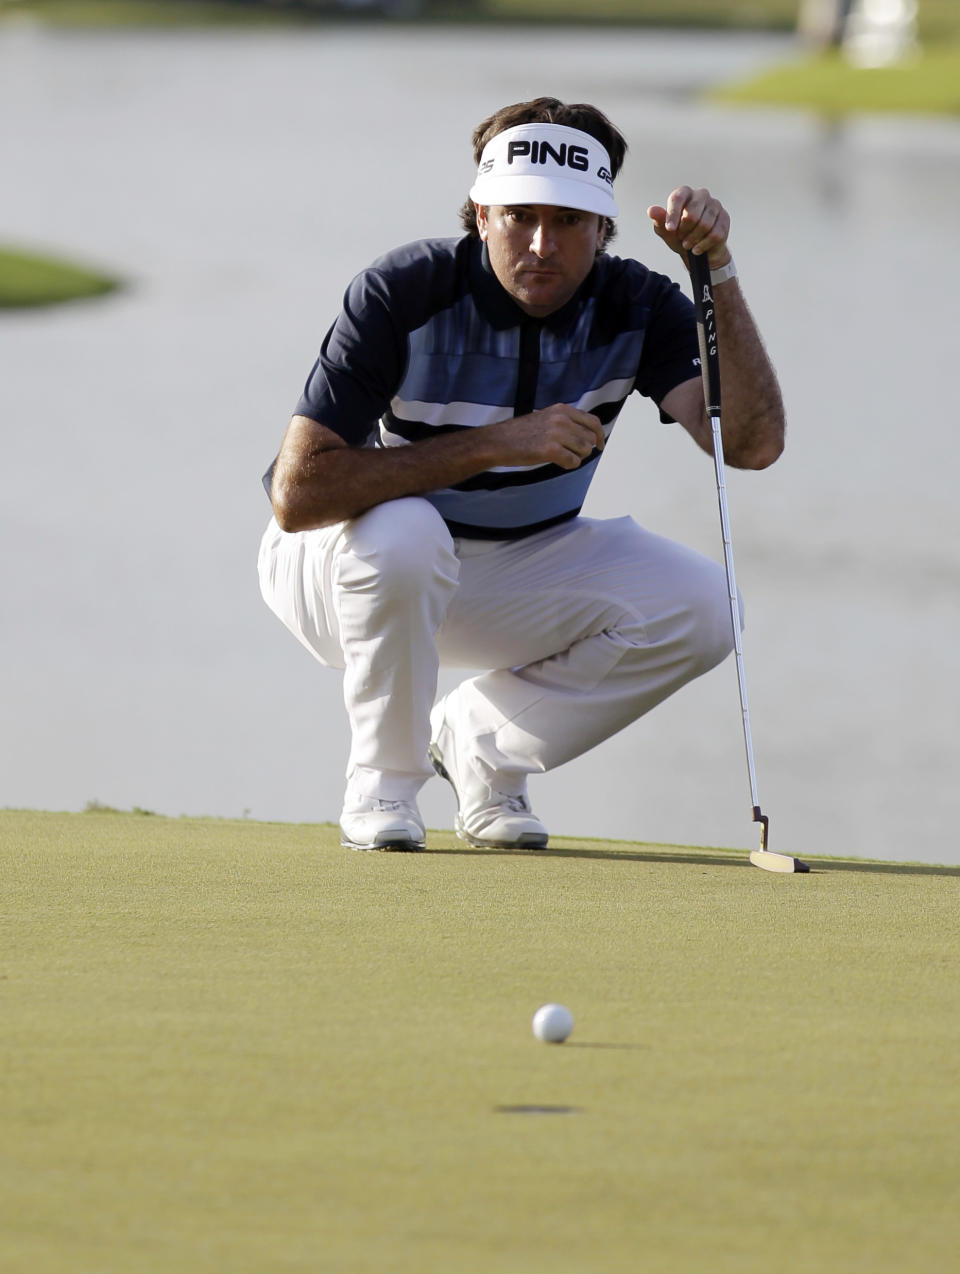 Bubba Watson looks at his shot on the 18th green during the final round of the Cadillac Championship golf tournament Sunday, March 9, 2014, in Doral, Fla. (AP Photo/Luis Alvarez)